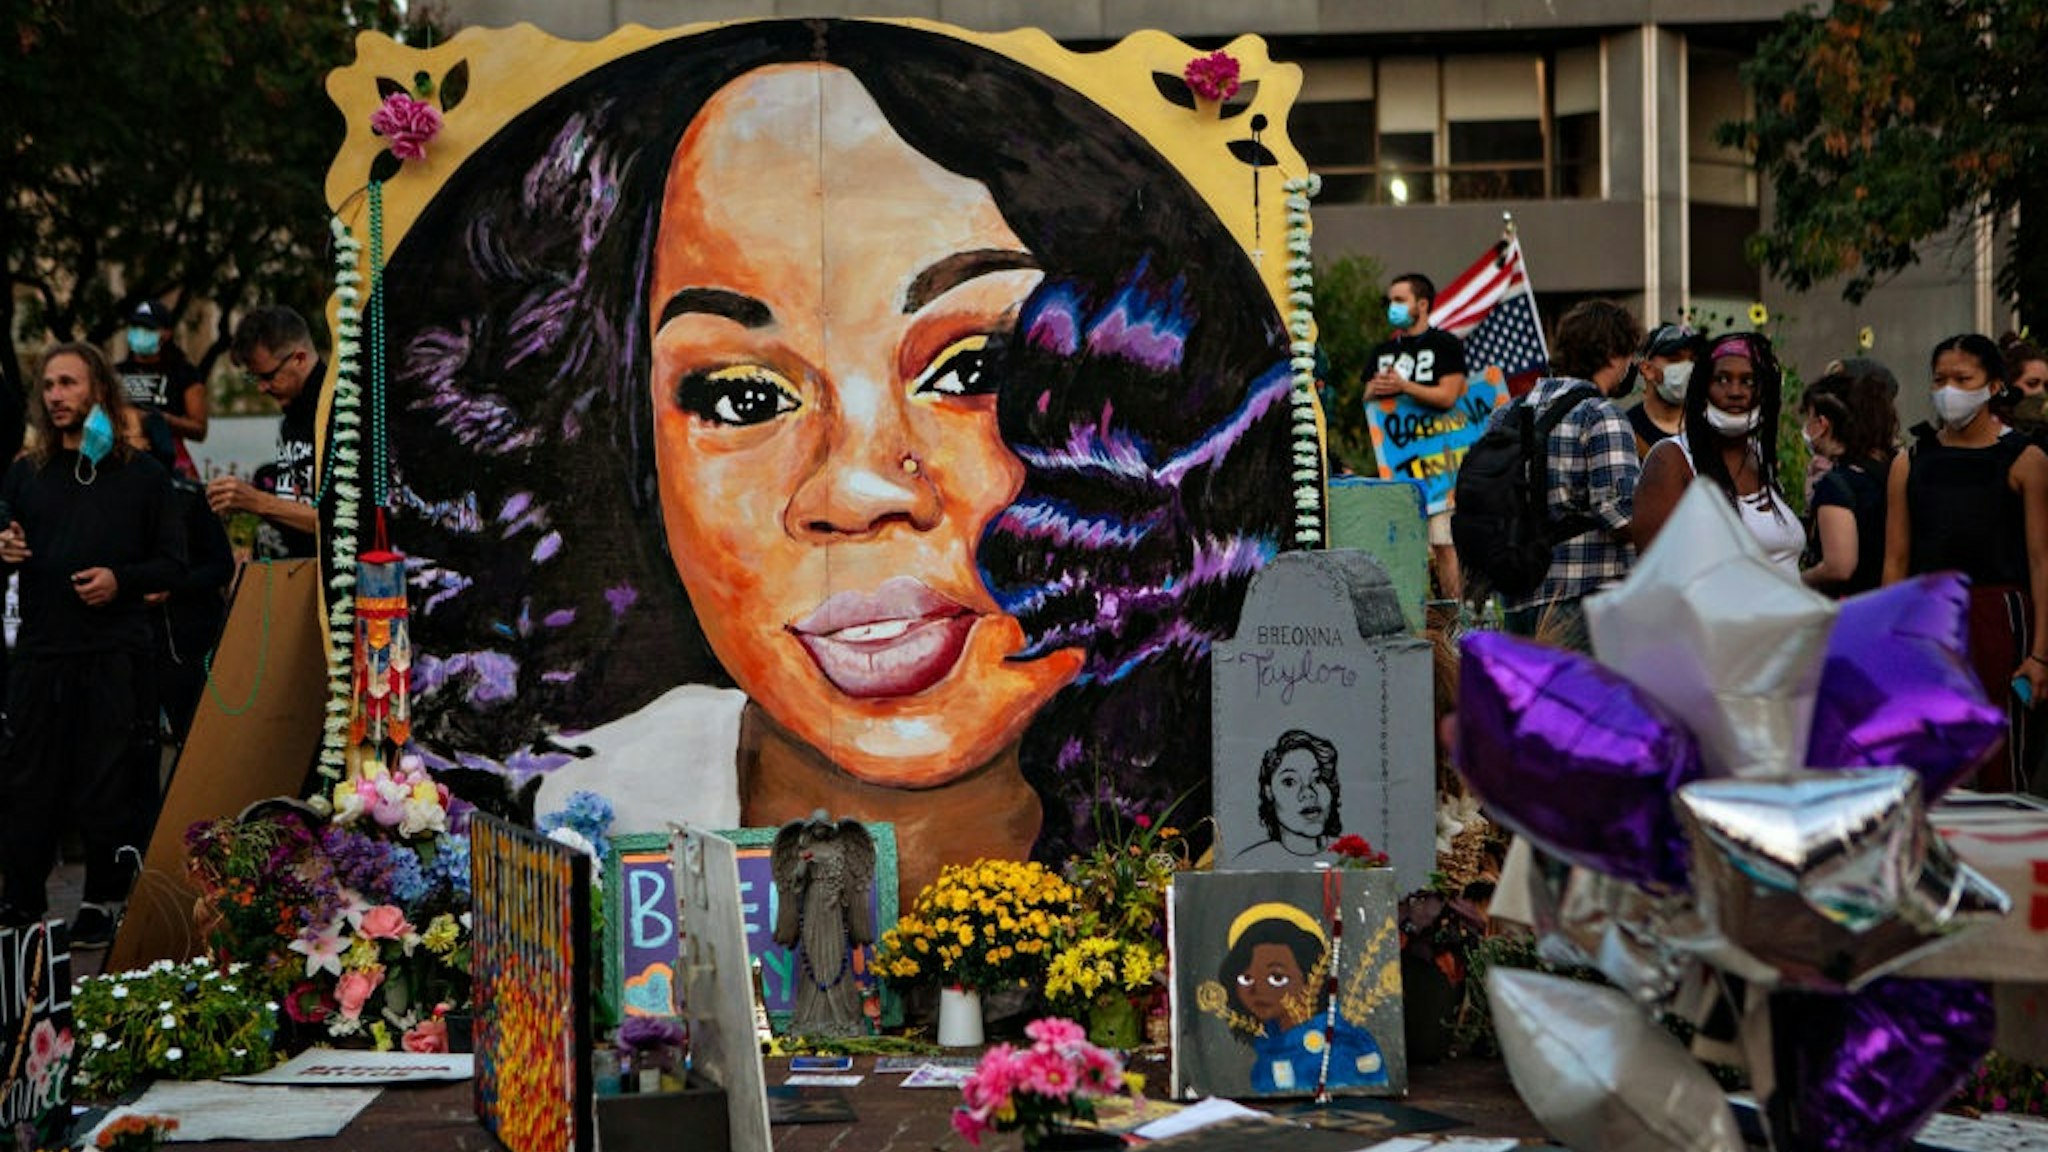 LOUISVILLE, KY - SEPTEMBER 26: People gather at Breonna Taylors make shift memorial in Injustice Square Park in downtown Louisville on Saturday, Sept. 26, 2020 in Louisville, KY.